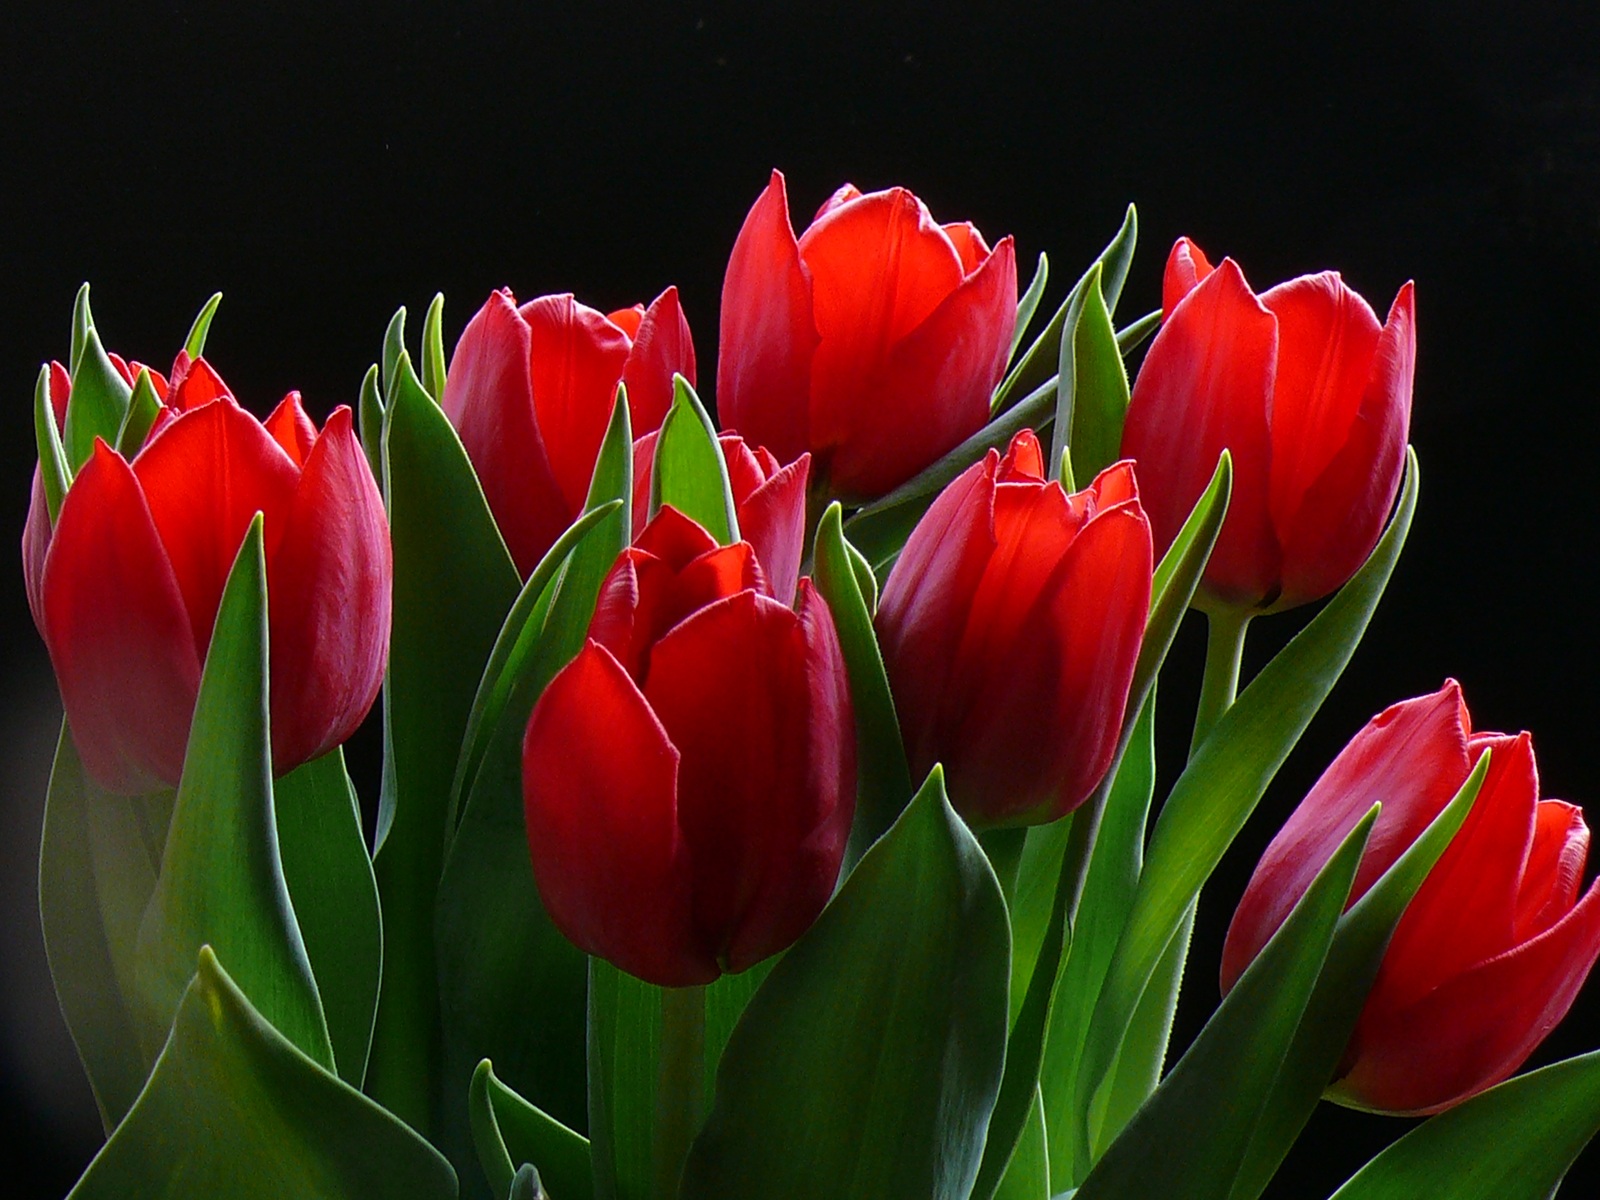 Wallpapers Tulips Flowers Image #71897 Download